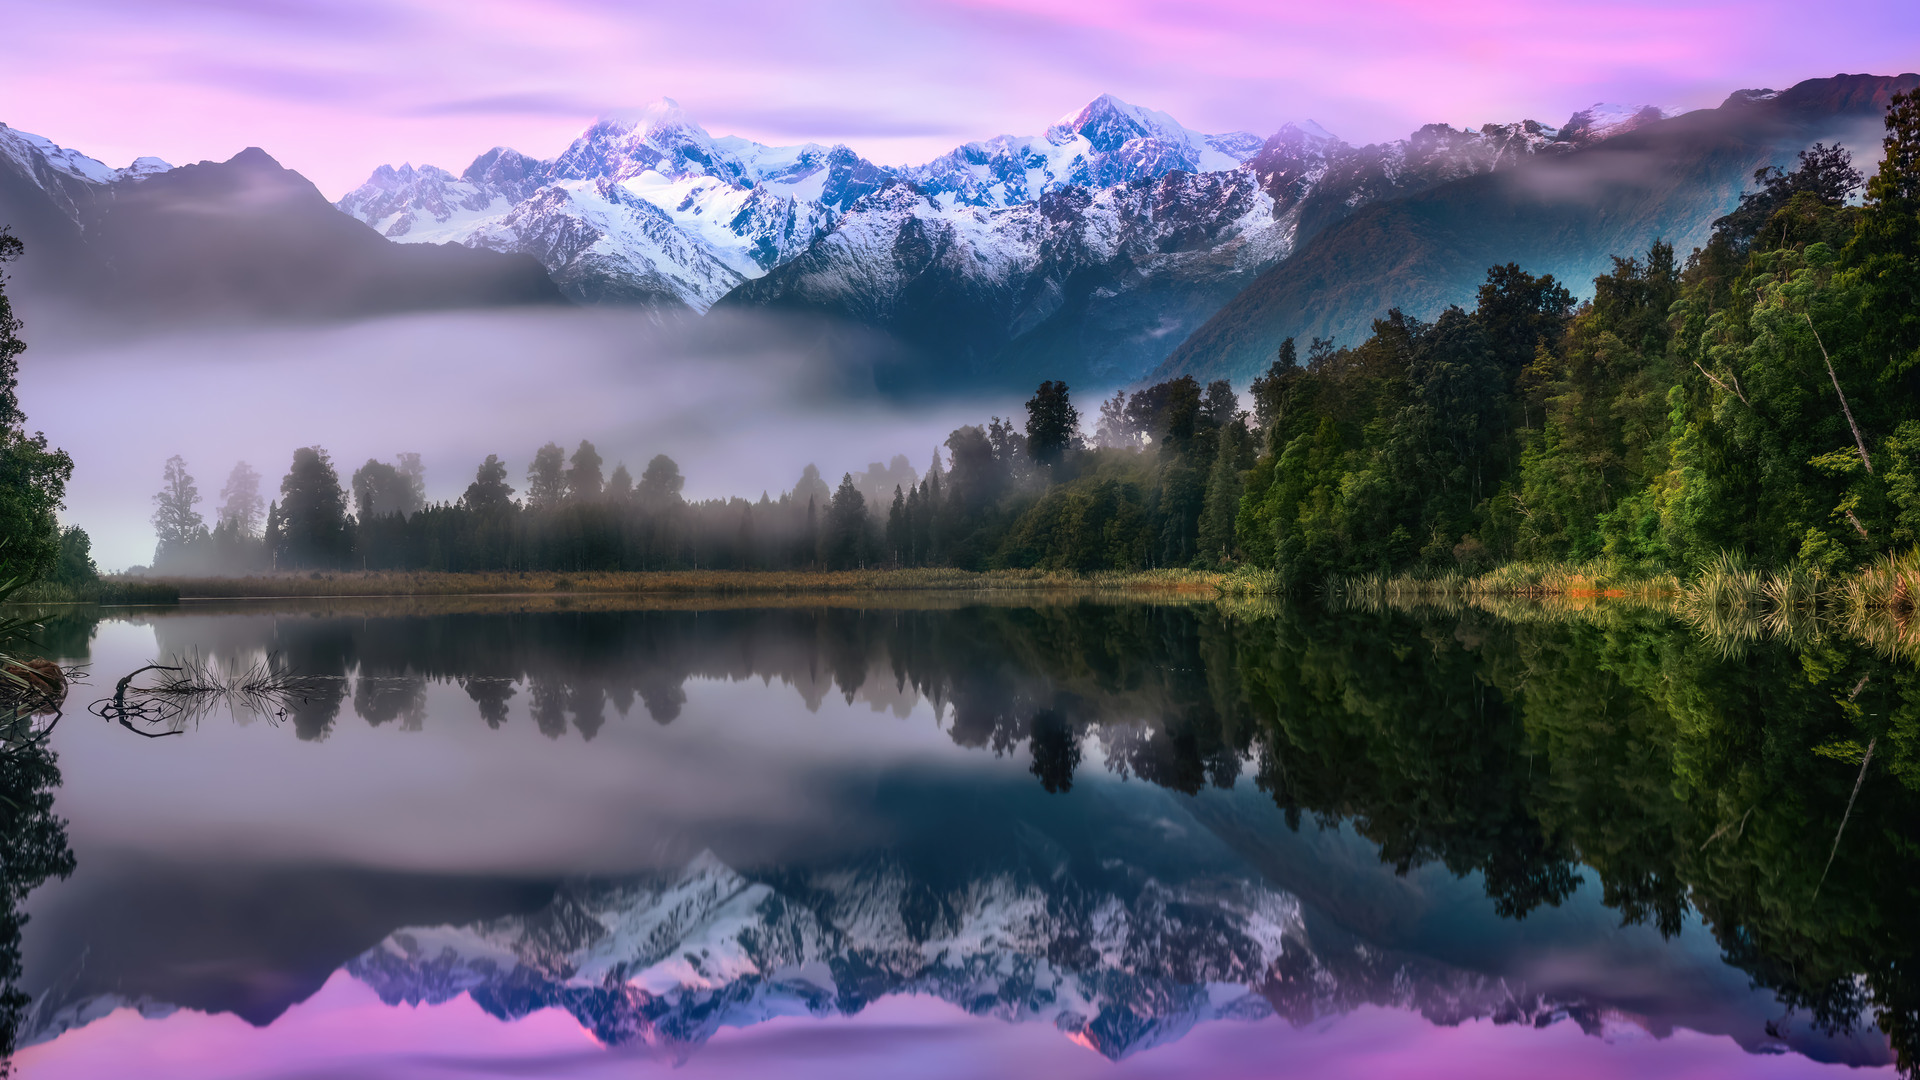 General 1920x1080 nature landscape trees forest lake clouds mountains snowy mountain reflection mist